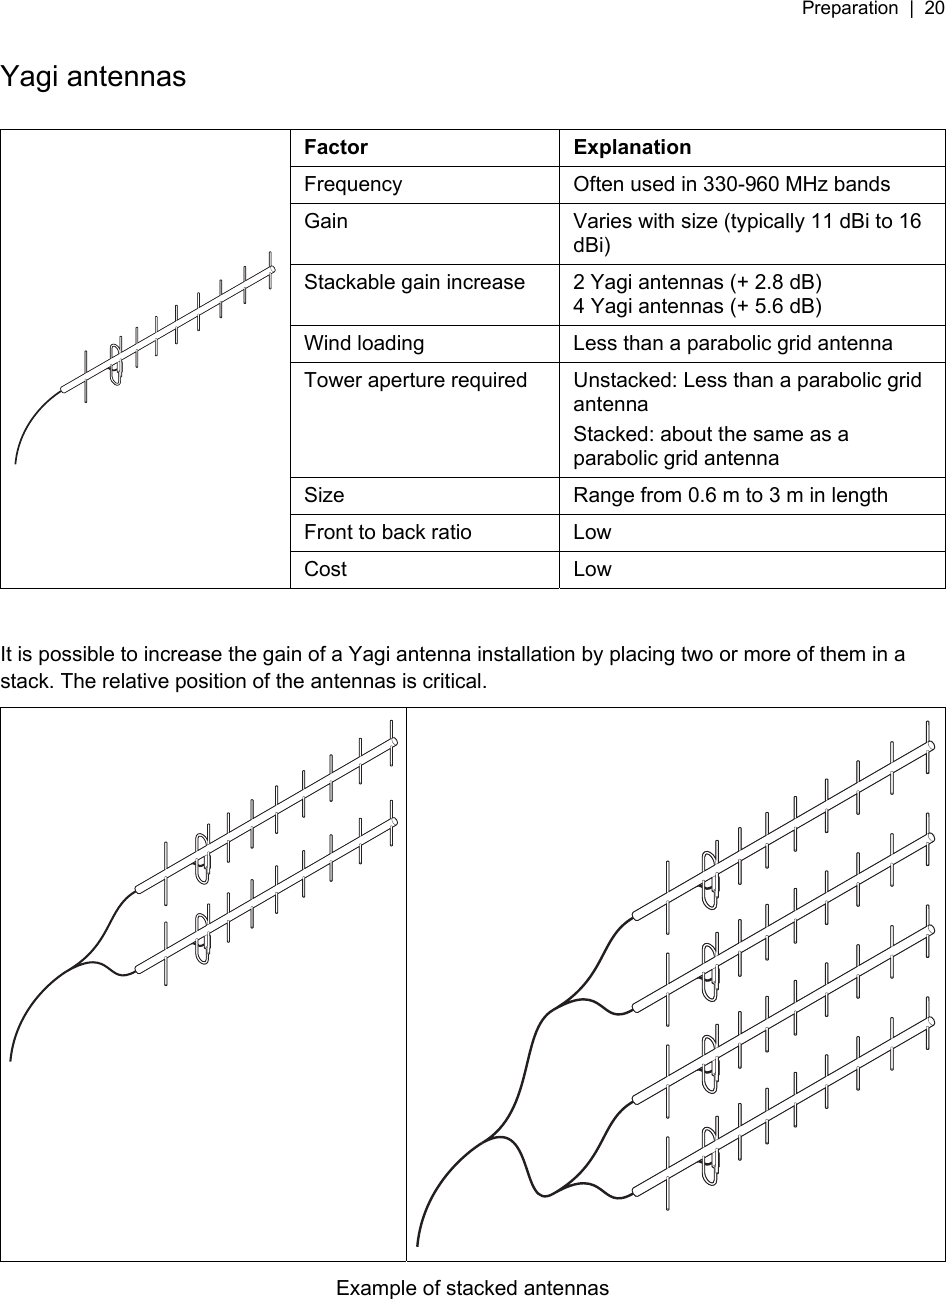 Preparation  |  20   Yagi antennas  Factor Explanation Frequency  Often used in 330-960 MHz bands Gain  Varies with size (typically 11 dBi to 16 dBi) Stackable gain increase  2 Yagi antennas (+ 2.8 dB) 4 Yagi antennas (+ 5.6 dB) Wind loading  Less than a parabolic grid antenna Tower aperture required  Unstacked: Less than a parabolic grid antenna Stacked: about the same as a parabolic grid antenna Size  Range from 0.6 m to 3 m in length Front to back ratio  Low  Cost Low  It is possible to increase the gain of a Yagi antenna installation by placing two or more of them in a stack. The relative position of the antennas is critical. Example of stacked antennas  